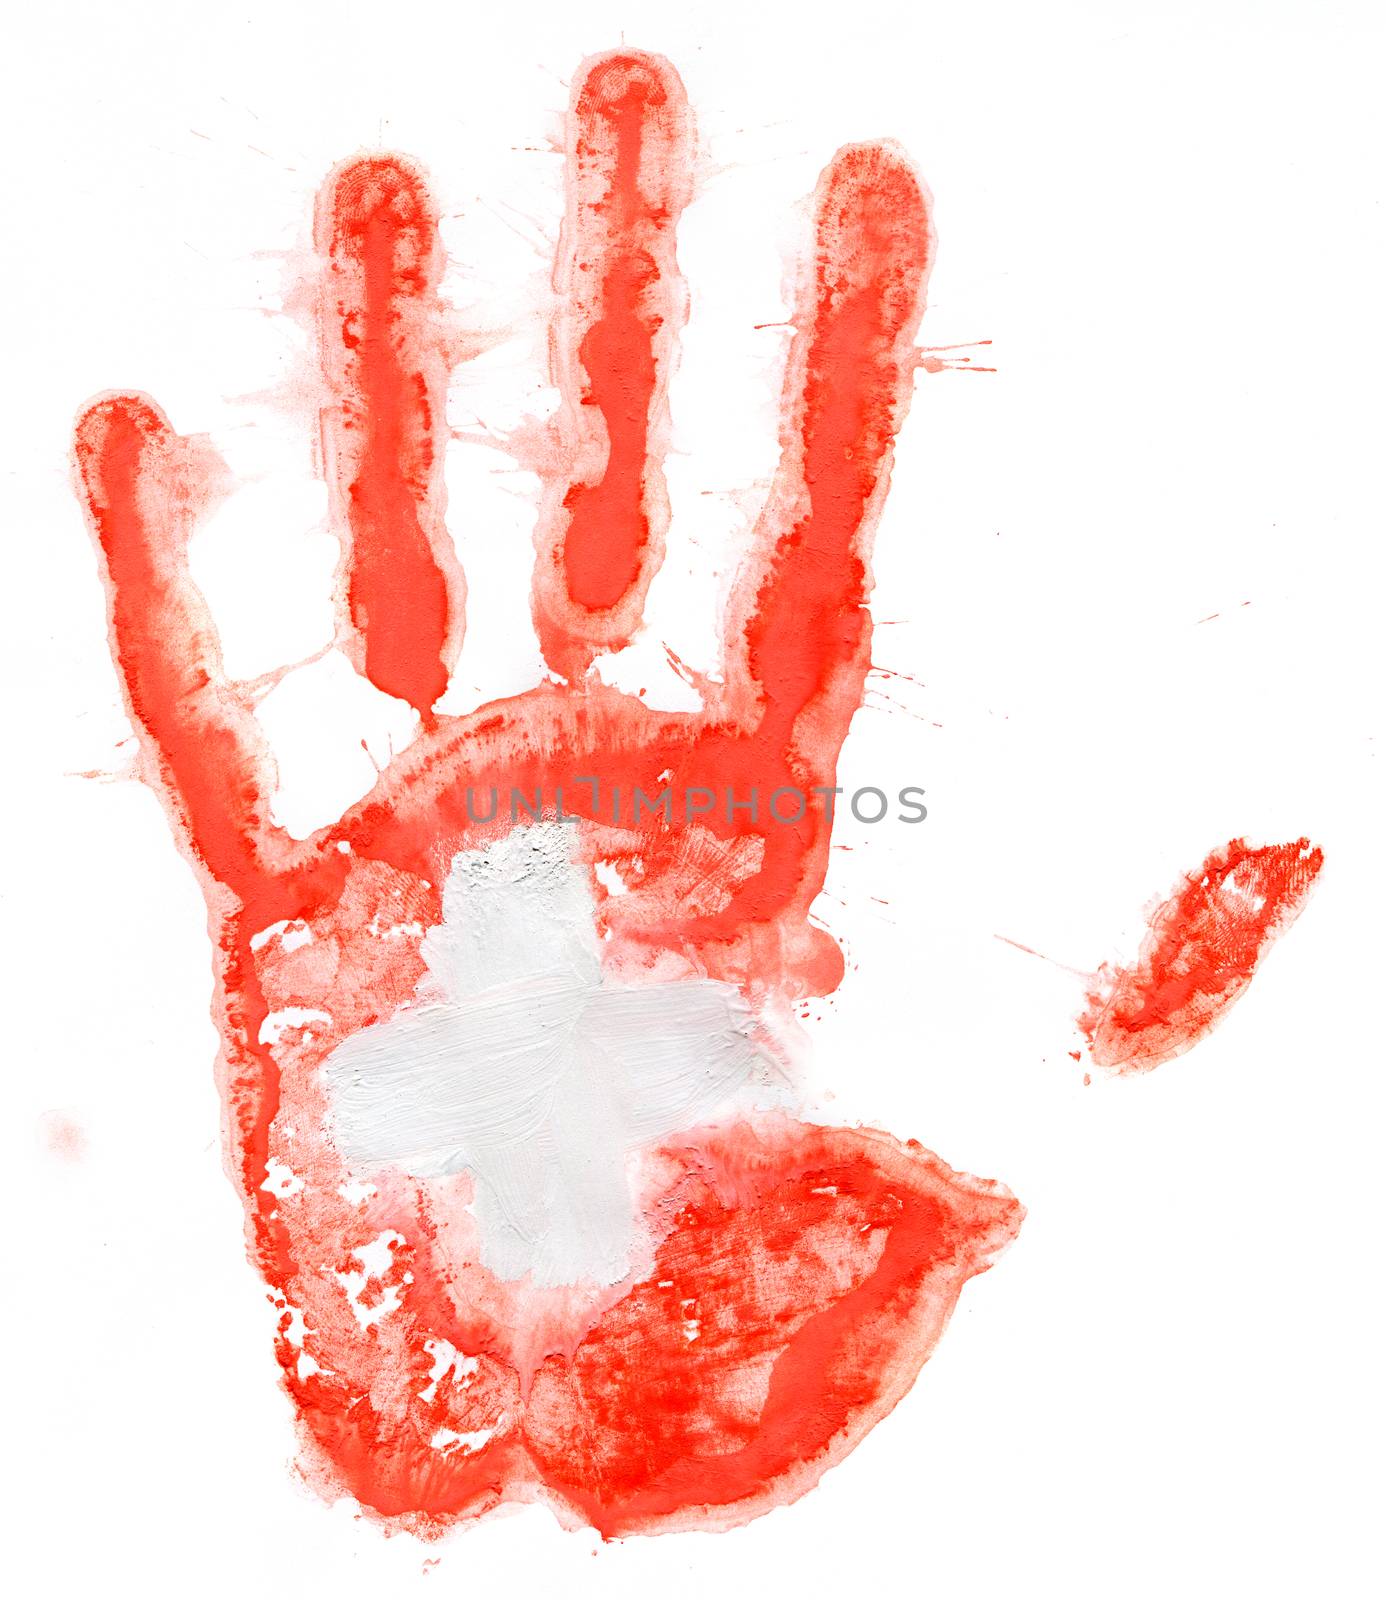 Handprint of a Swiss flag on a white background